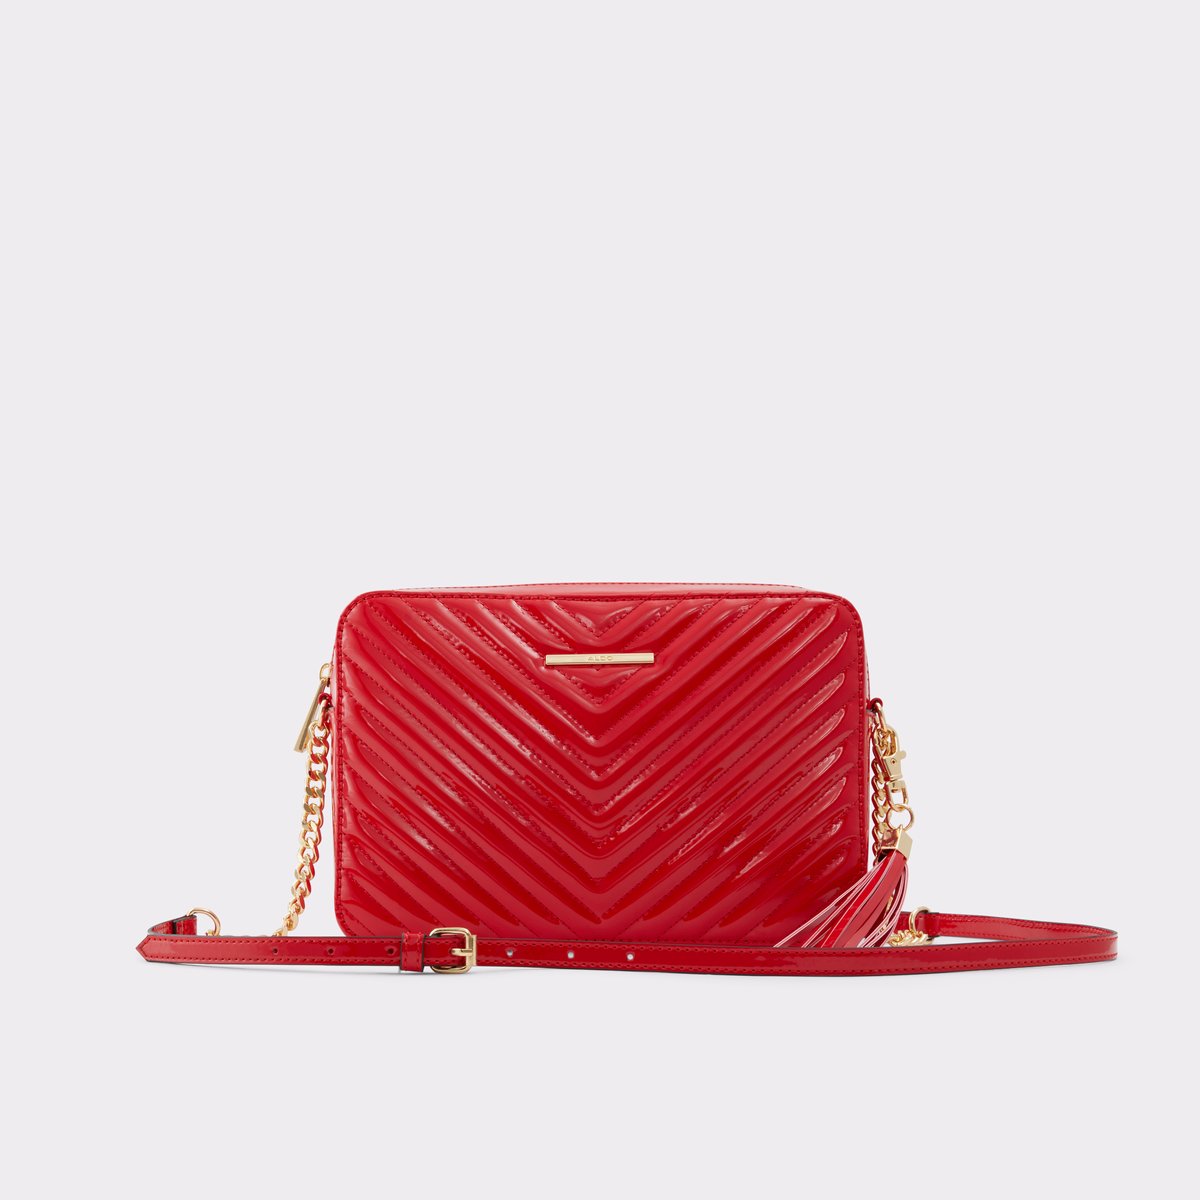 Aldo Top Handle Purse with Strap in Dark Red | www.theconservative.online